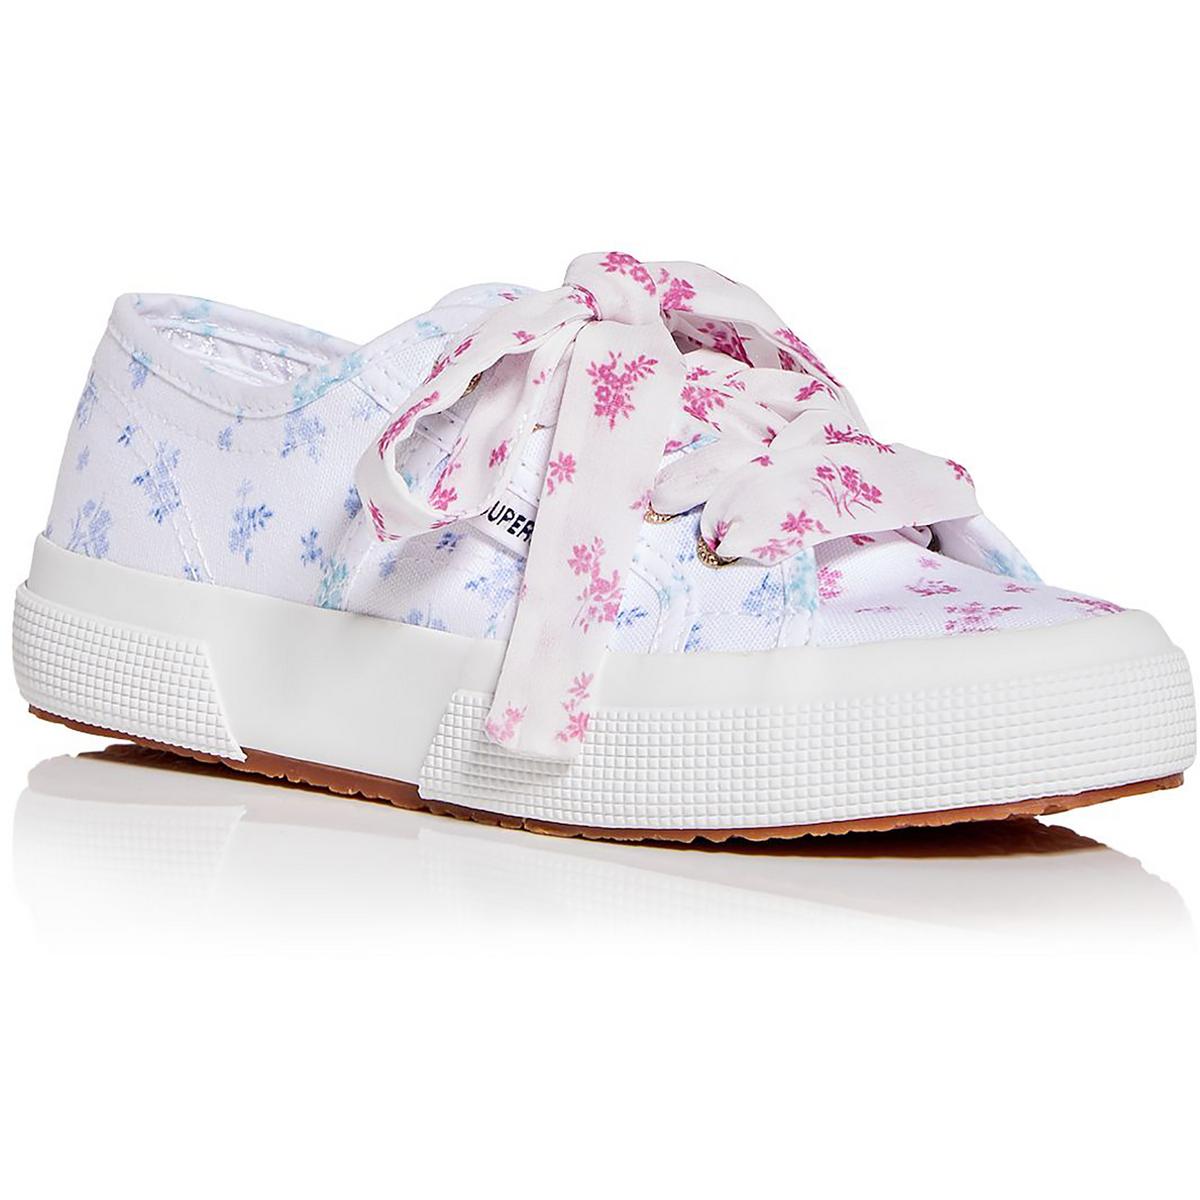 Superga 270 Flower Print MI Womens Fitness Lifestyle Casual and Fashion Sneakers